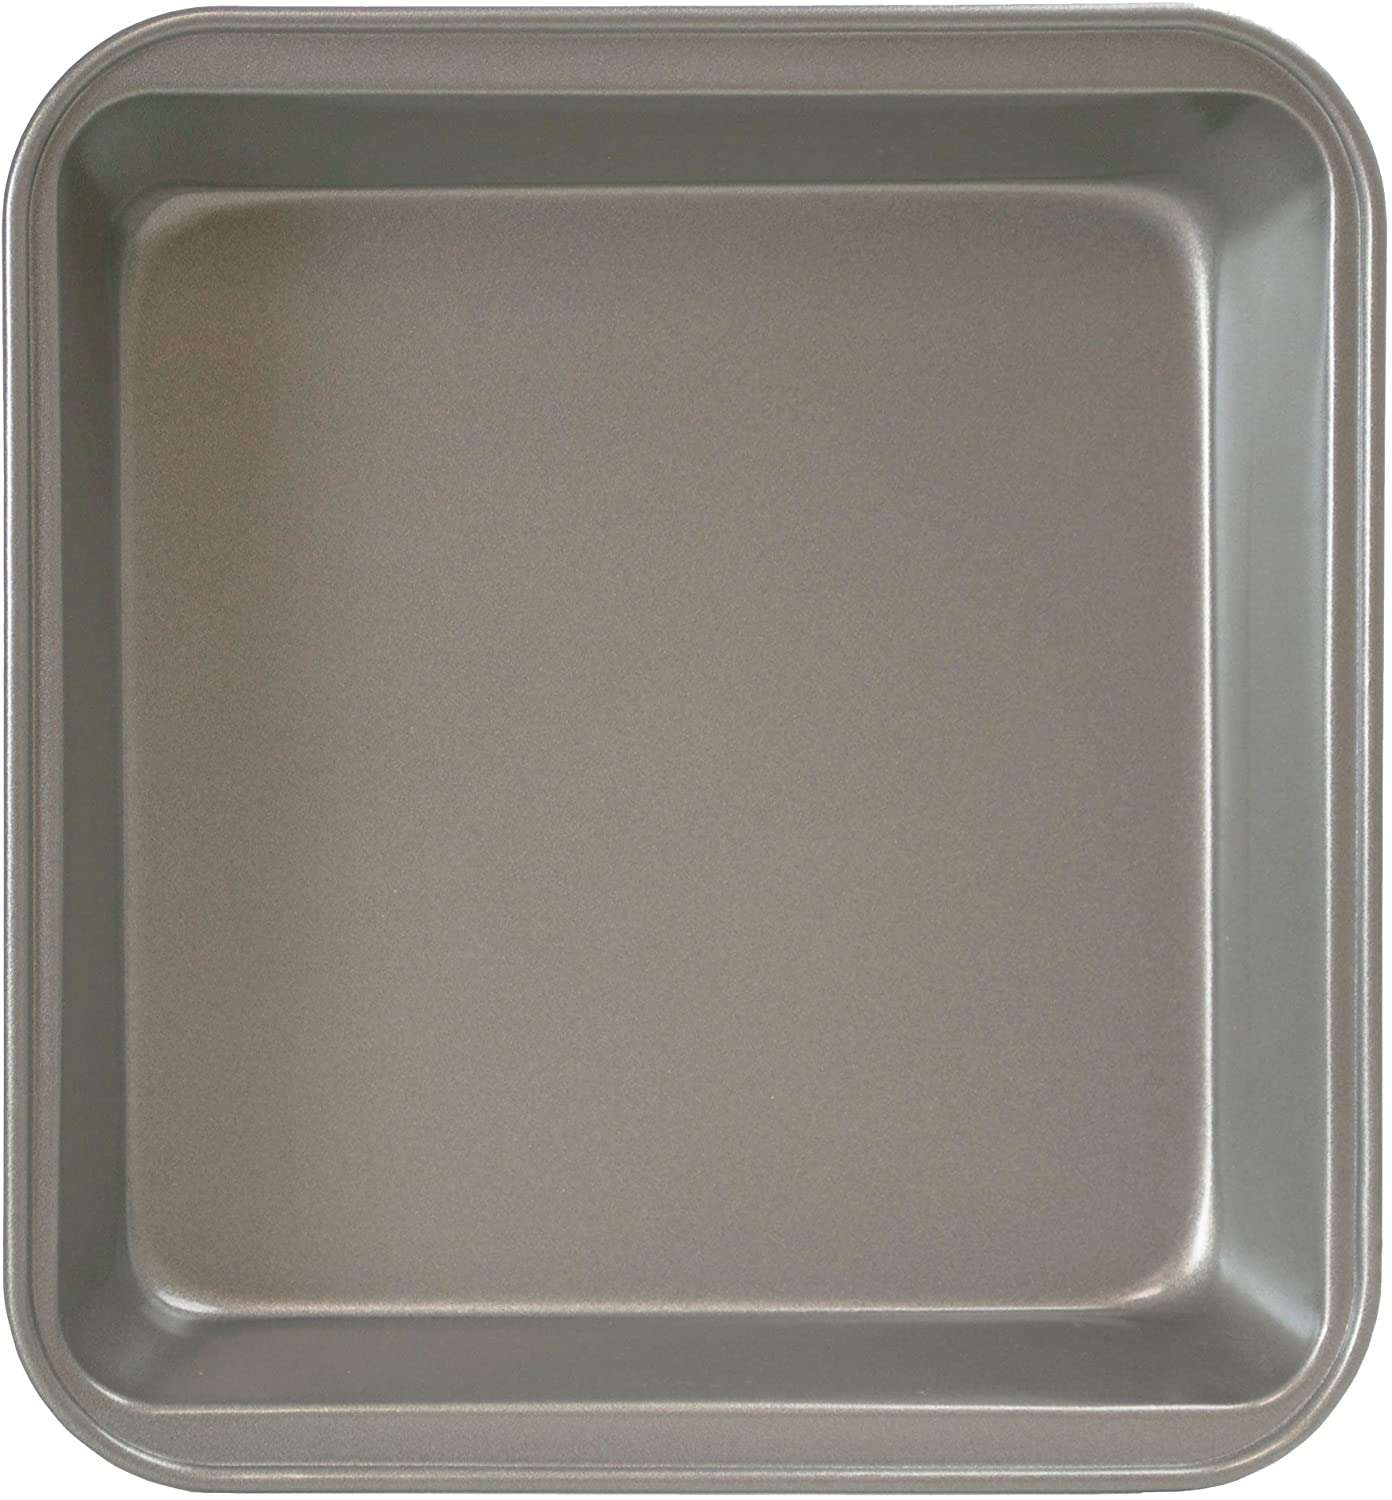 PADERNO Professional Uncoated Aluminum Round Cake Pan, 9-in | Canadian Tire